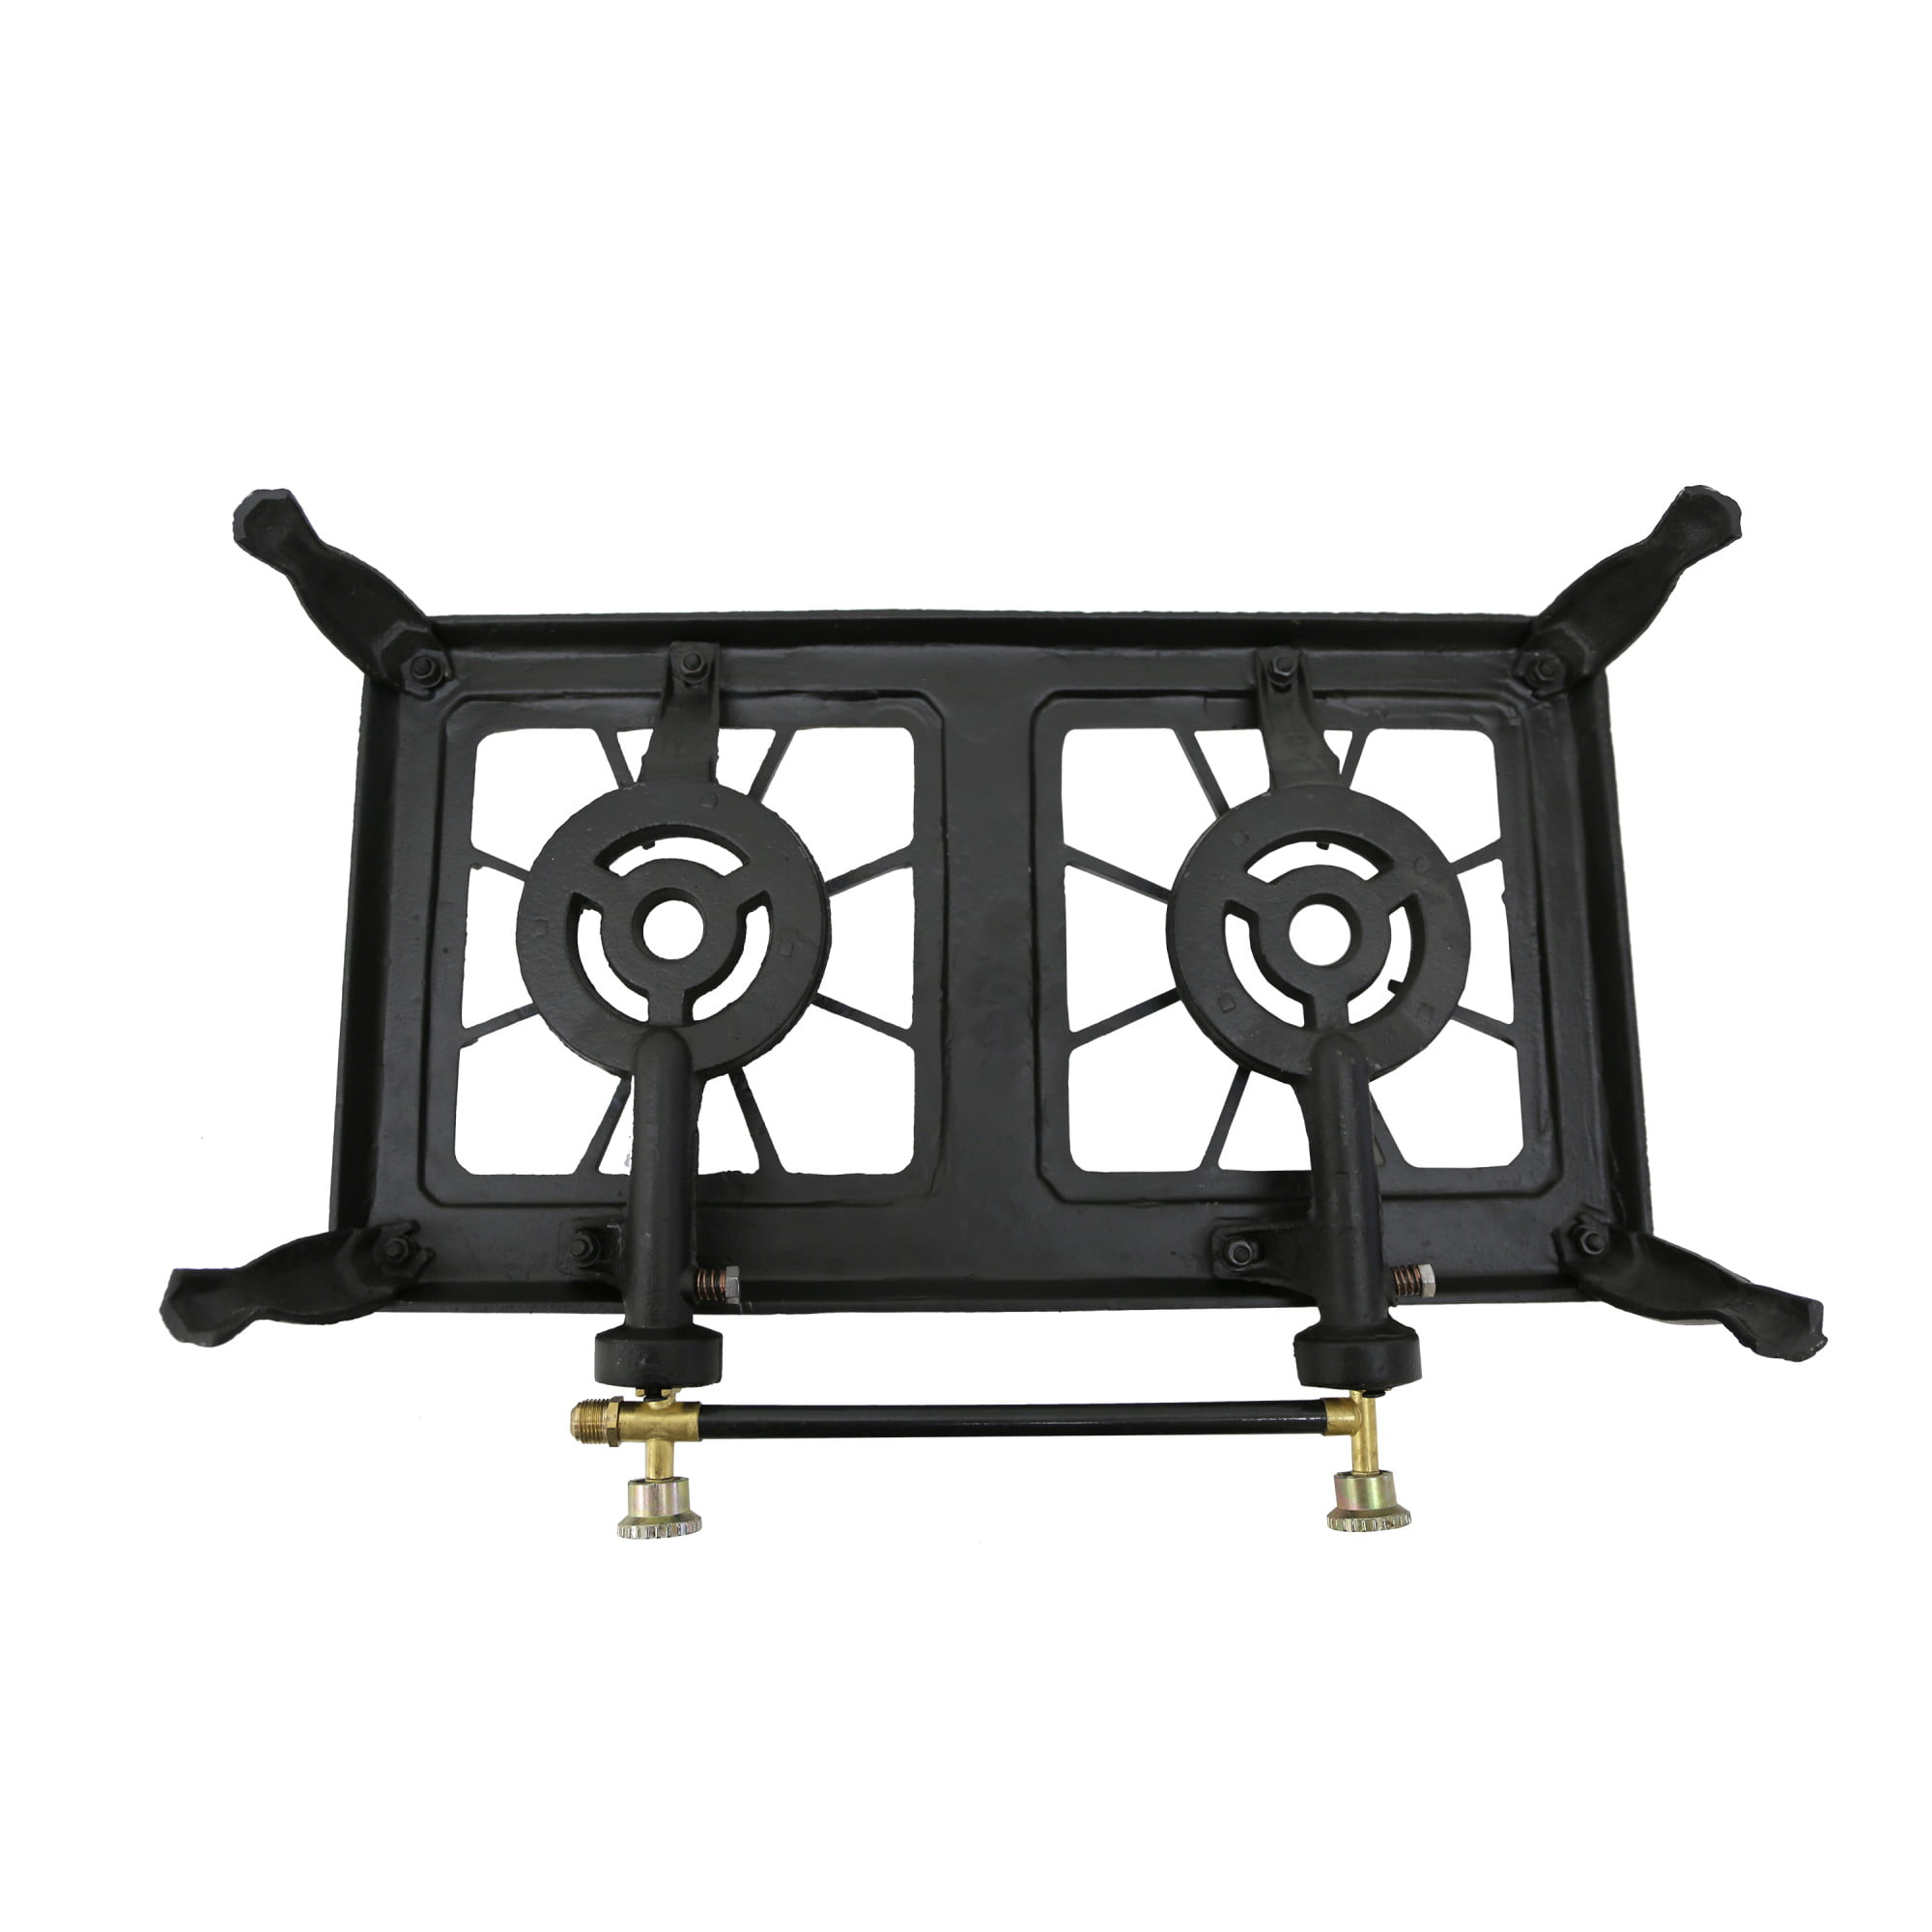 Stansport Stainless Steel Double Burner Stove With Stand : Target